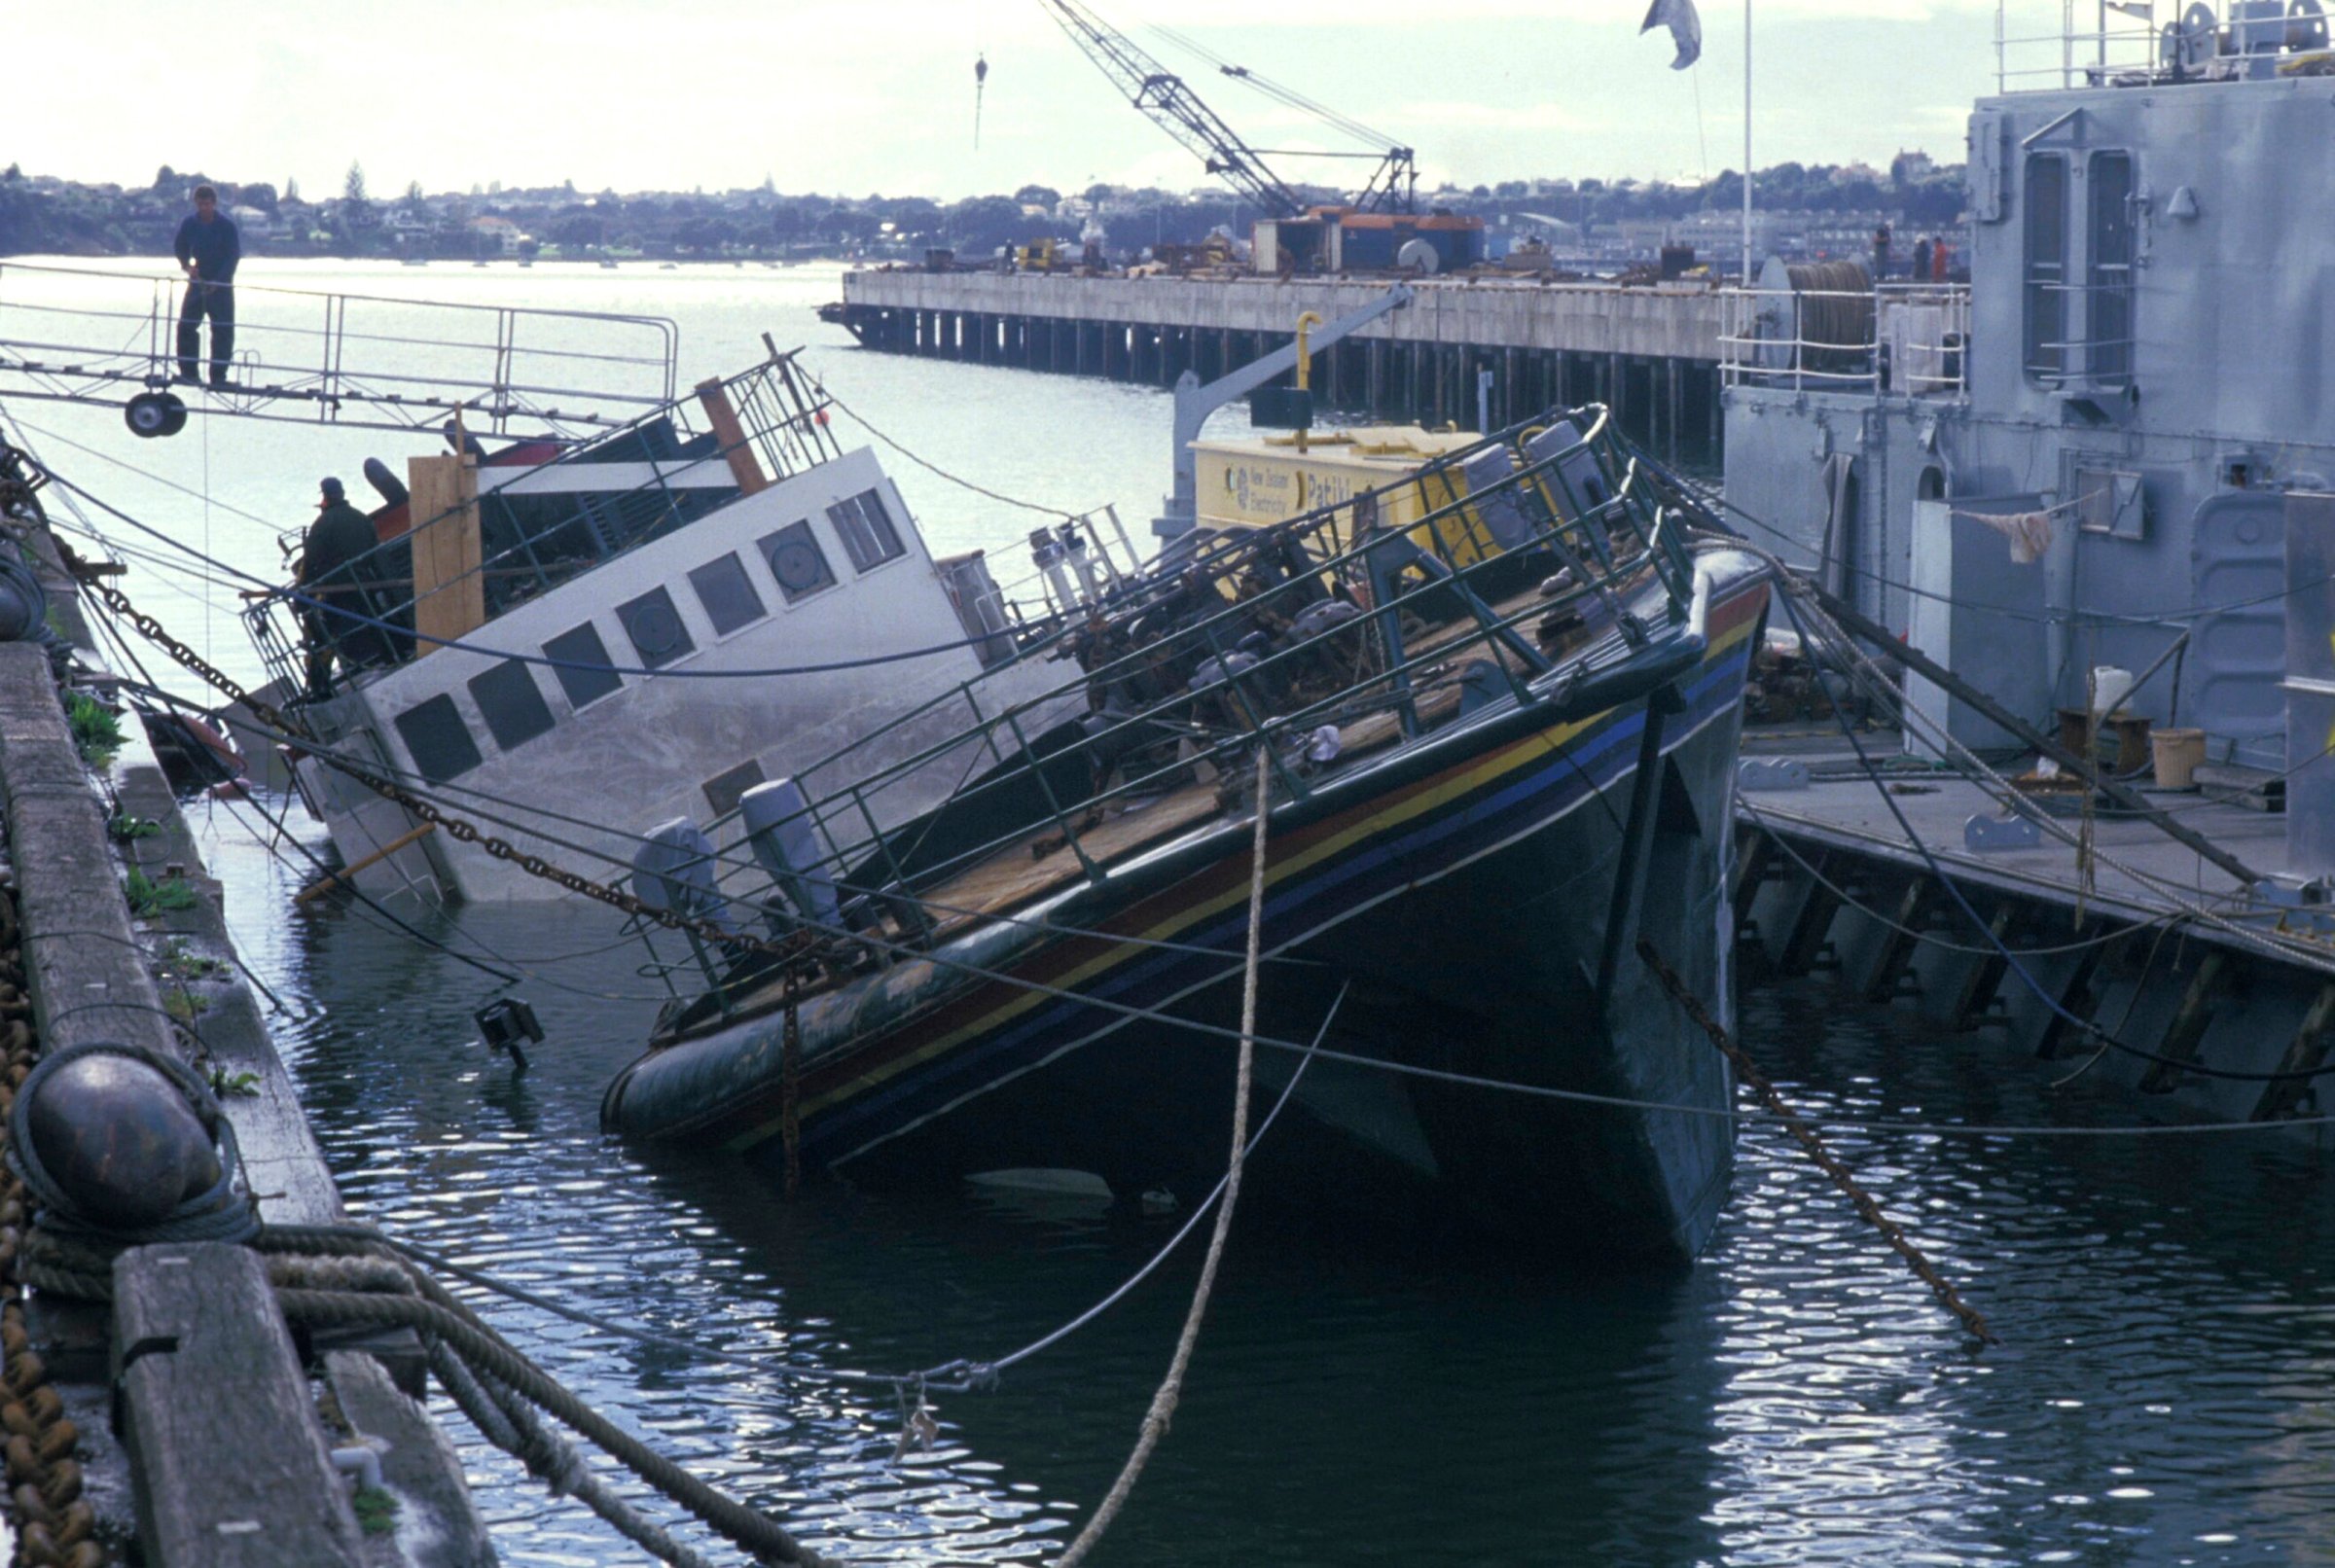 Greenpeace Rainbow Warrior sinking in the Bay of Auckland in New Zealand, July 10, 1985.